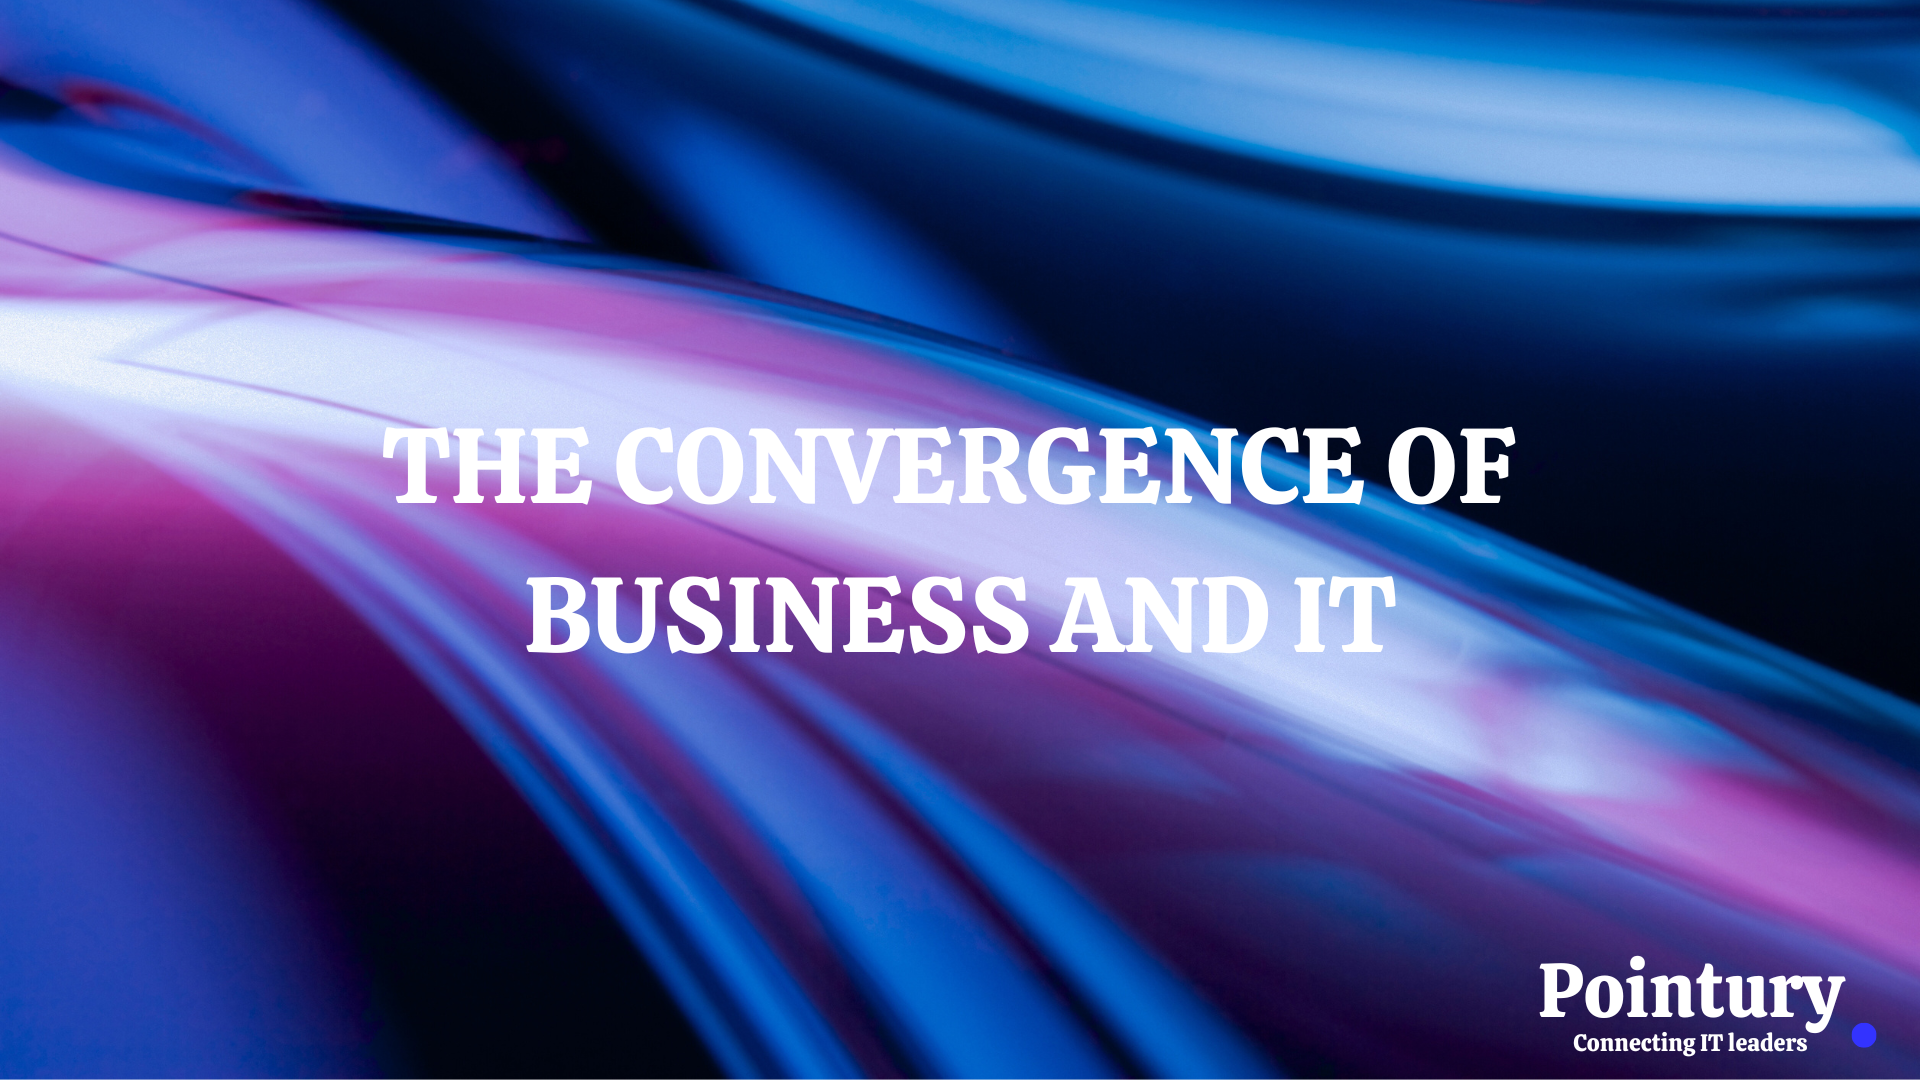 CONVERGENCE OF BUSINESS AND IT